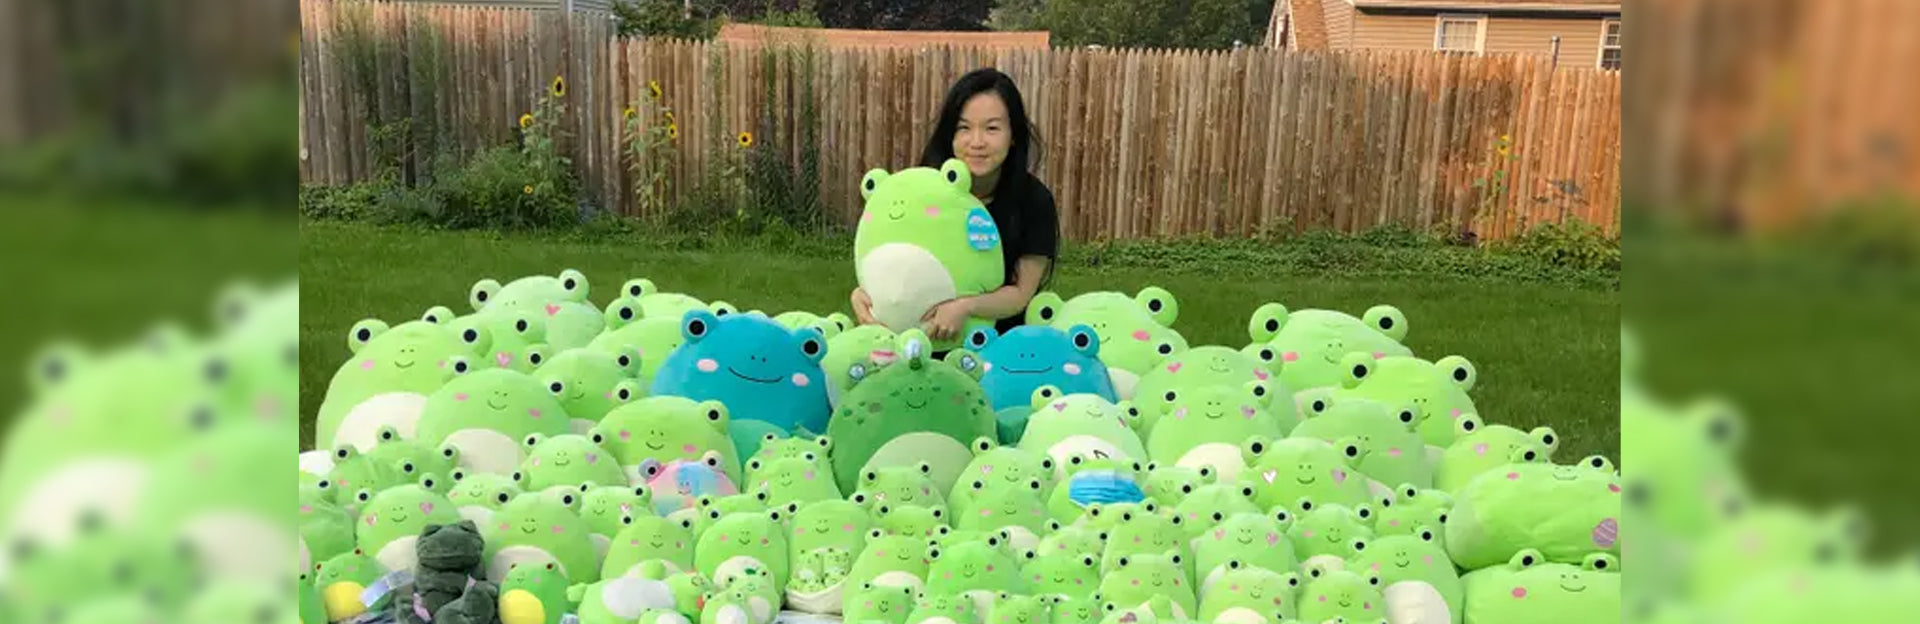  Squishmallows Original 12-Inch Ludwig Teal Frog